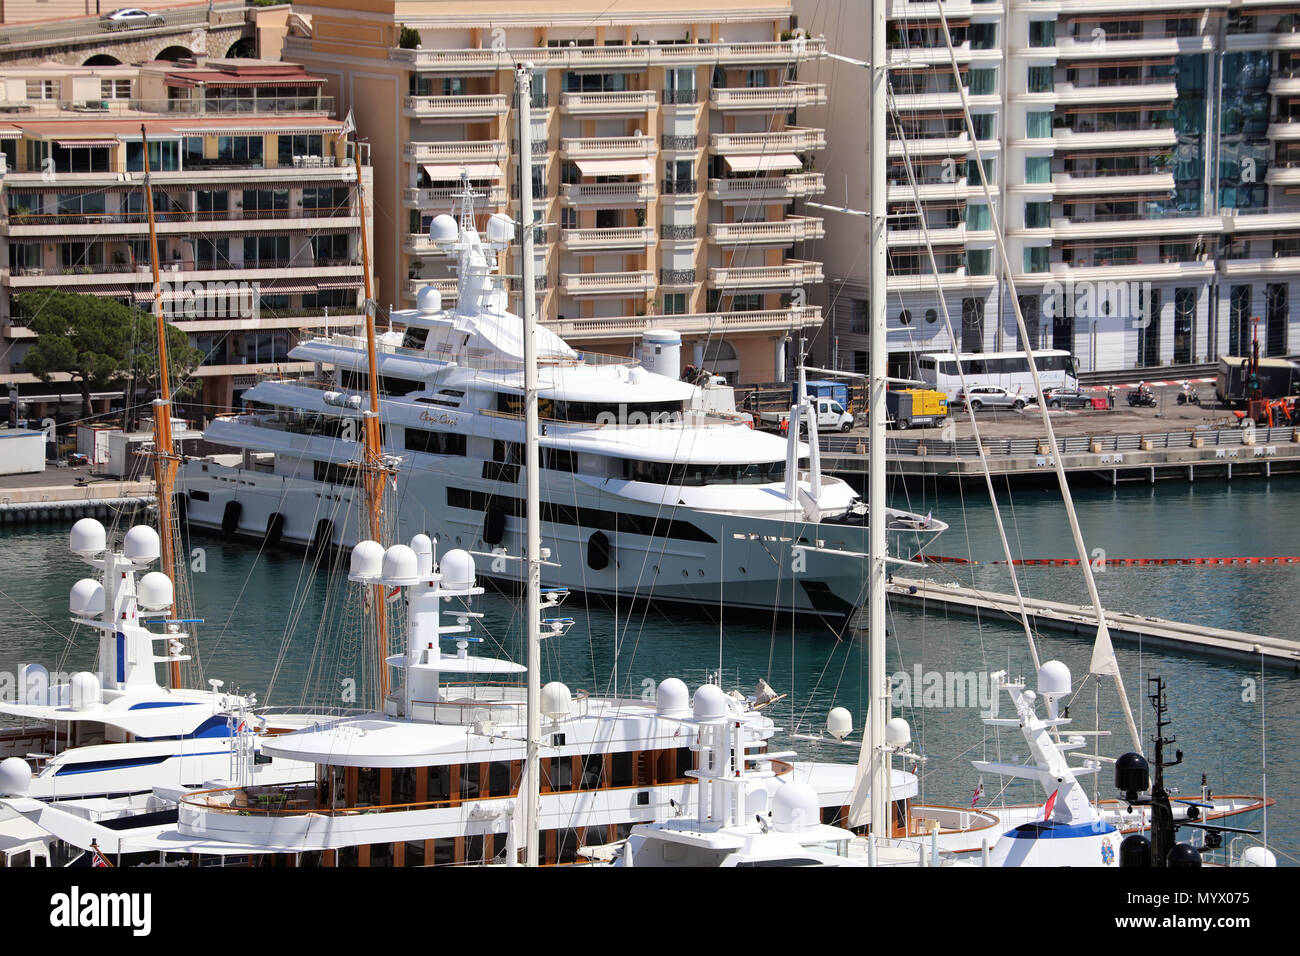 Monte-Carlo, Monaco - June 7, 2018: Many Luxurious Yachts And Boats Moored at Port Hercule. Principality of Monaco, French Riviera Stock Photo